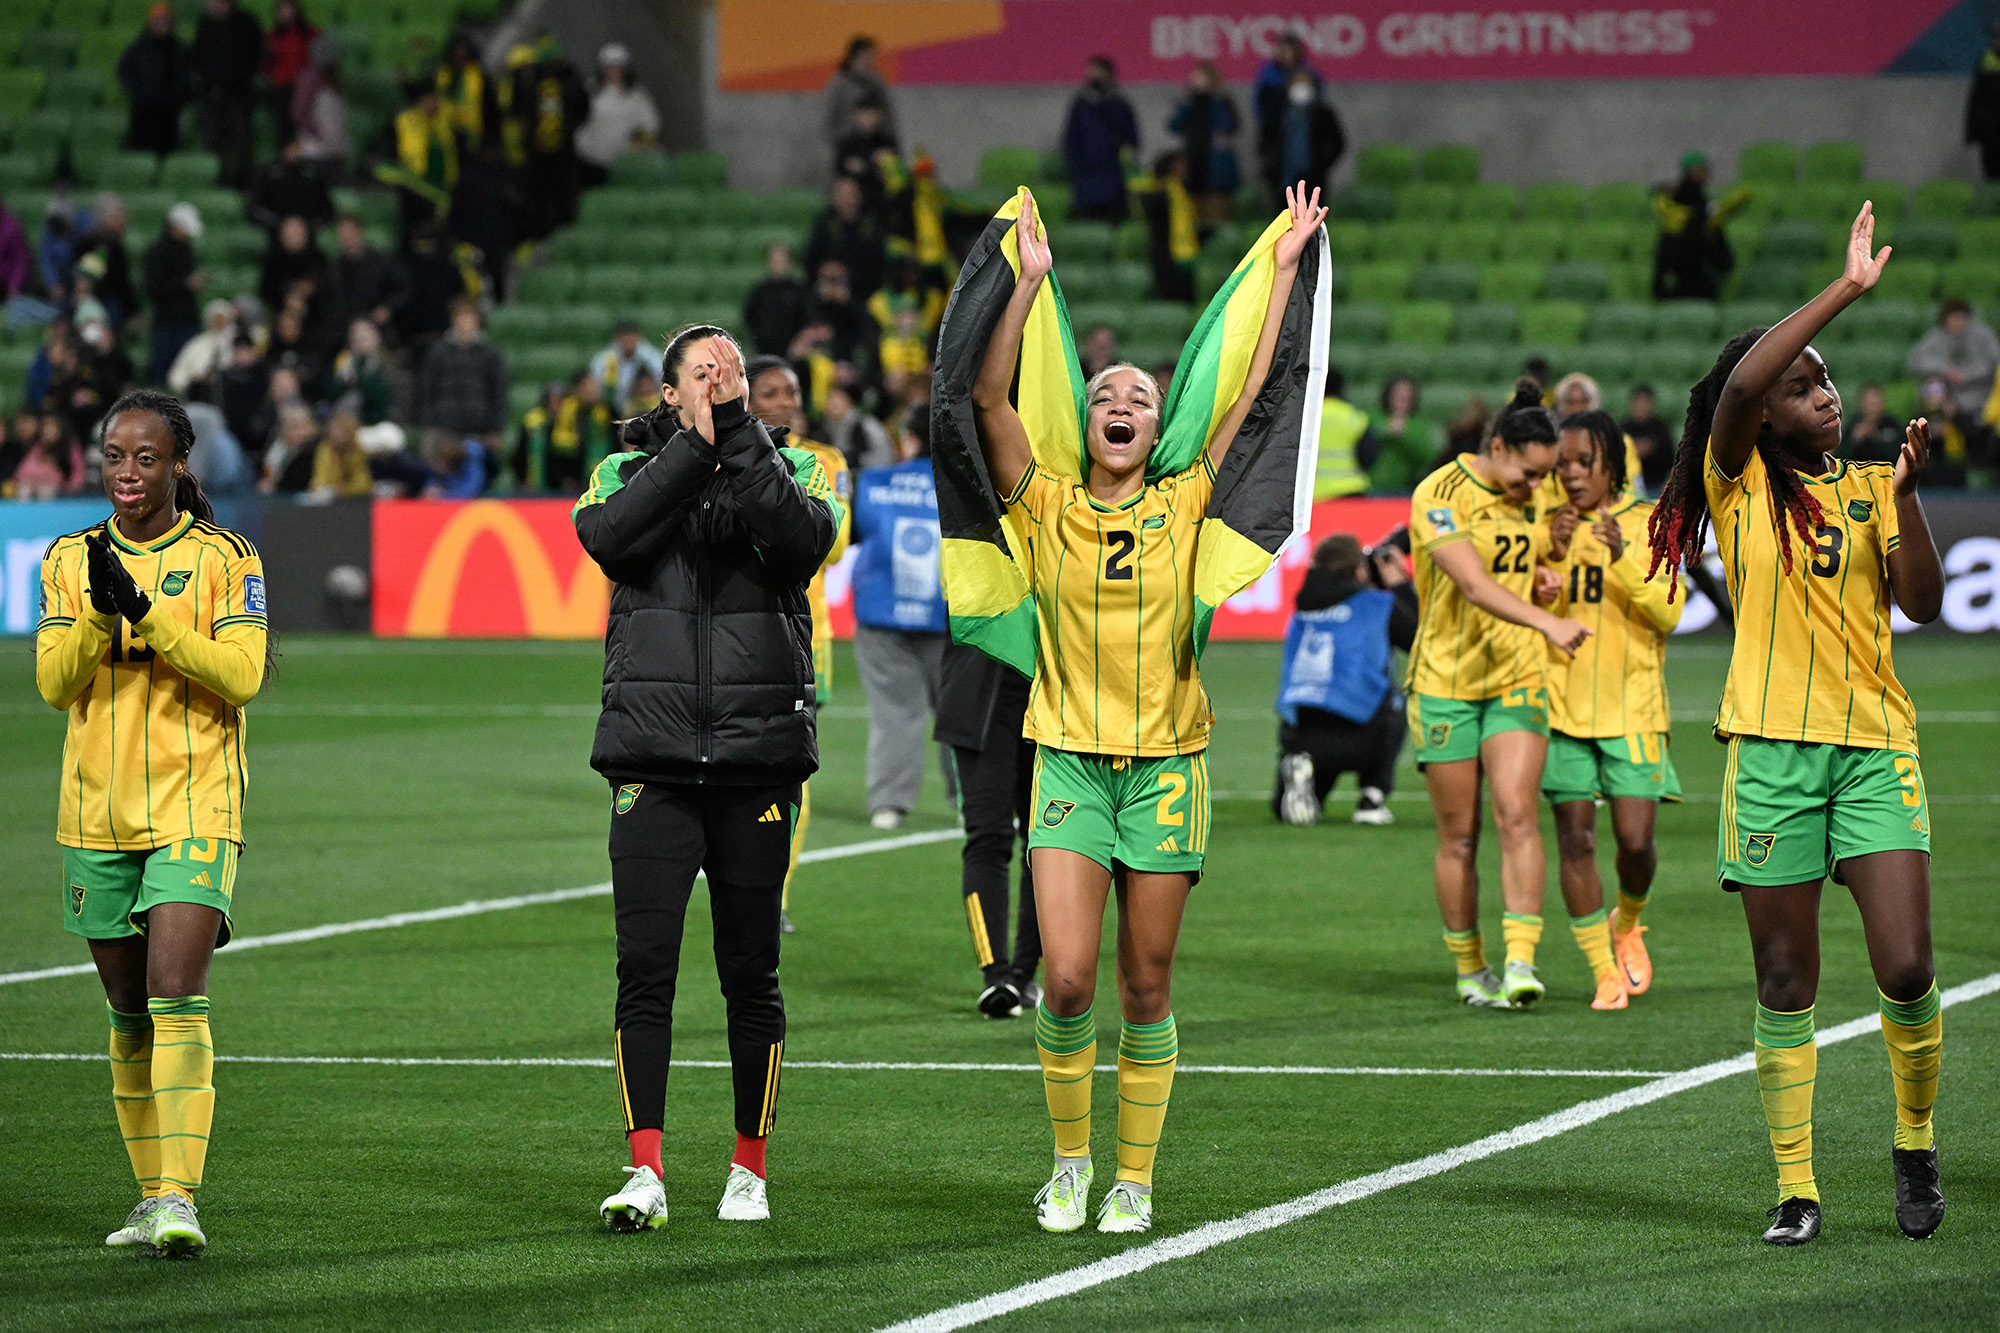 Jamaica's players celebrate after qualifying for the last 16 of the Women's World Cup by drawing with Brazil at Melbourne Rectangular Stadium in Australia on August 2.